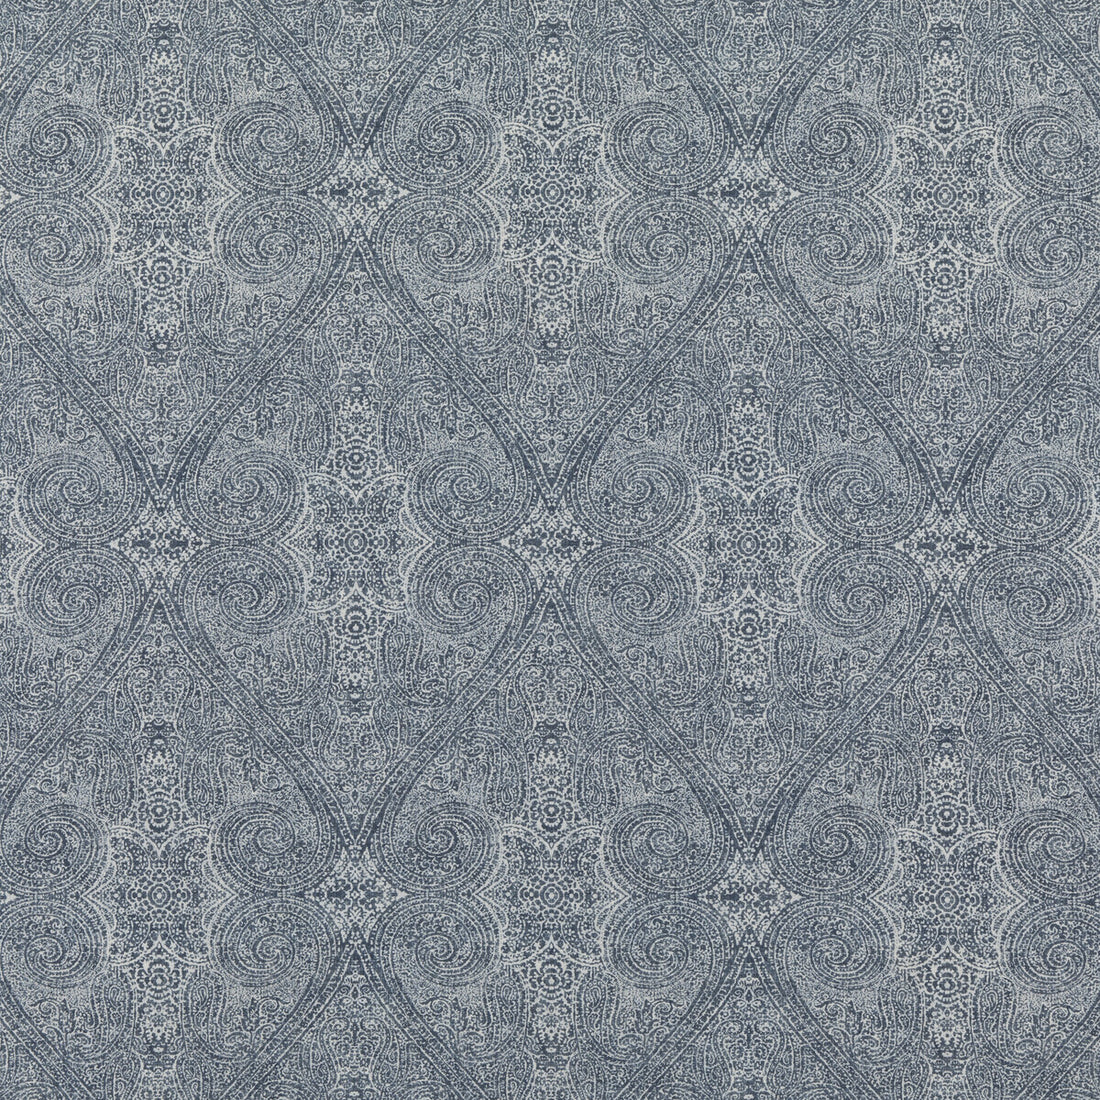 Marida fabric in indigo color - pattern PP50449.1.0 - by Baker Lifestyle in the Homes &amp; Gardens III collection